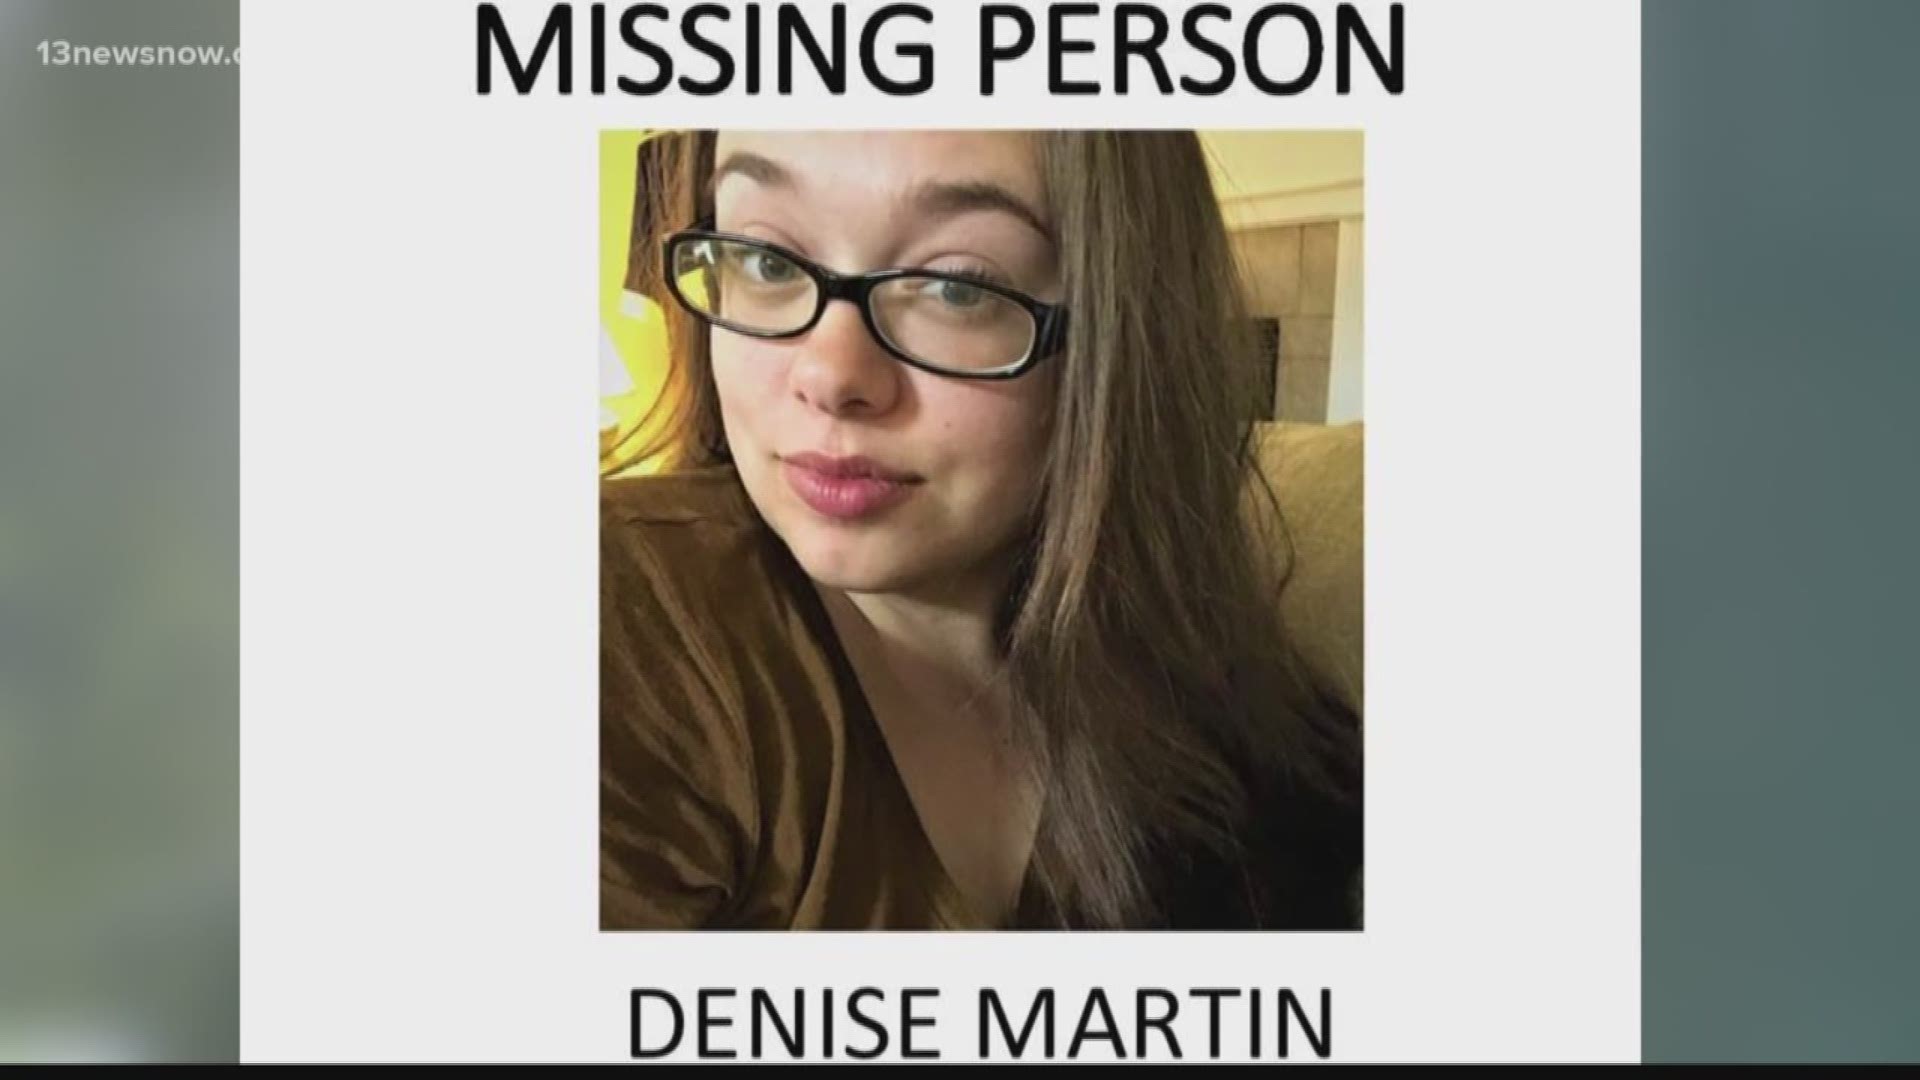 The 22-year-old Virginia Beach woman has not been seen since June 19.